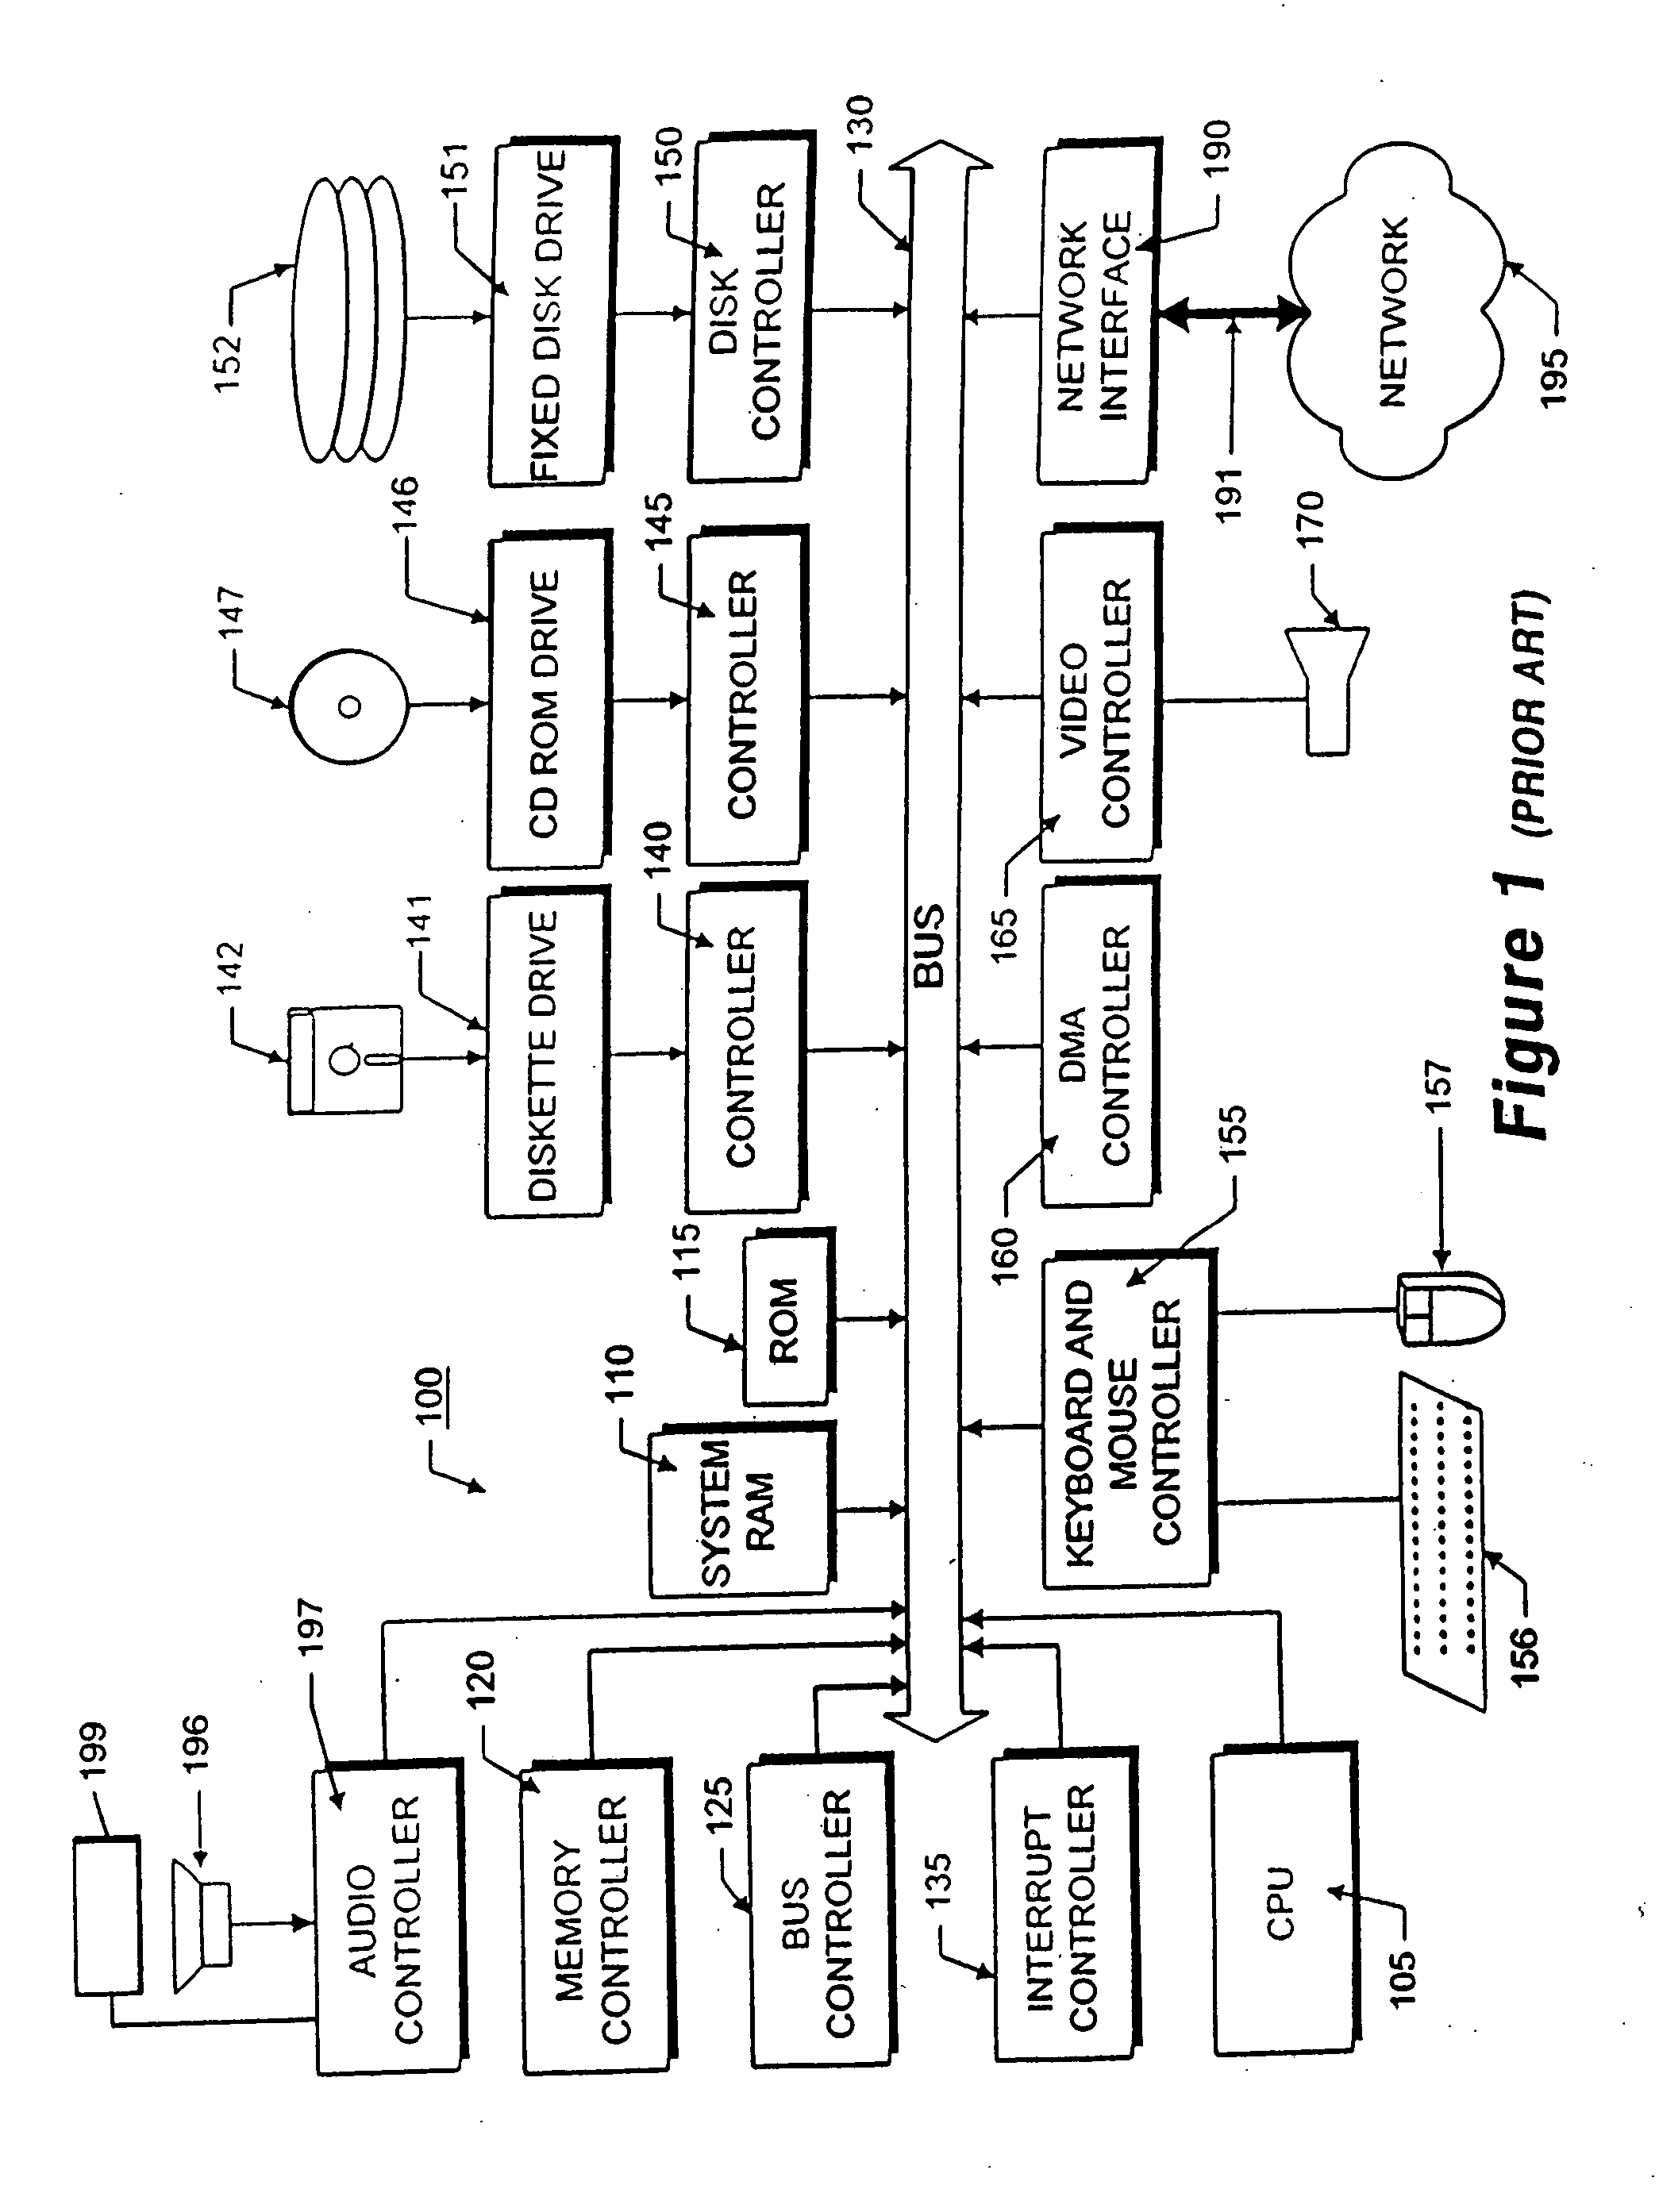 Method and apparatus for modifying the winning bid in an on-line auction to benefit a charitable organization